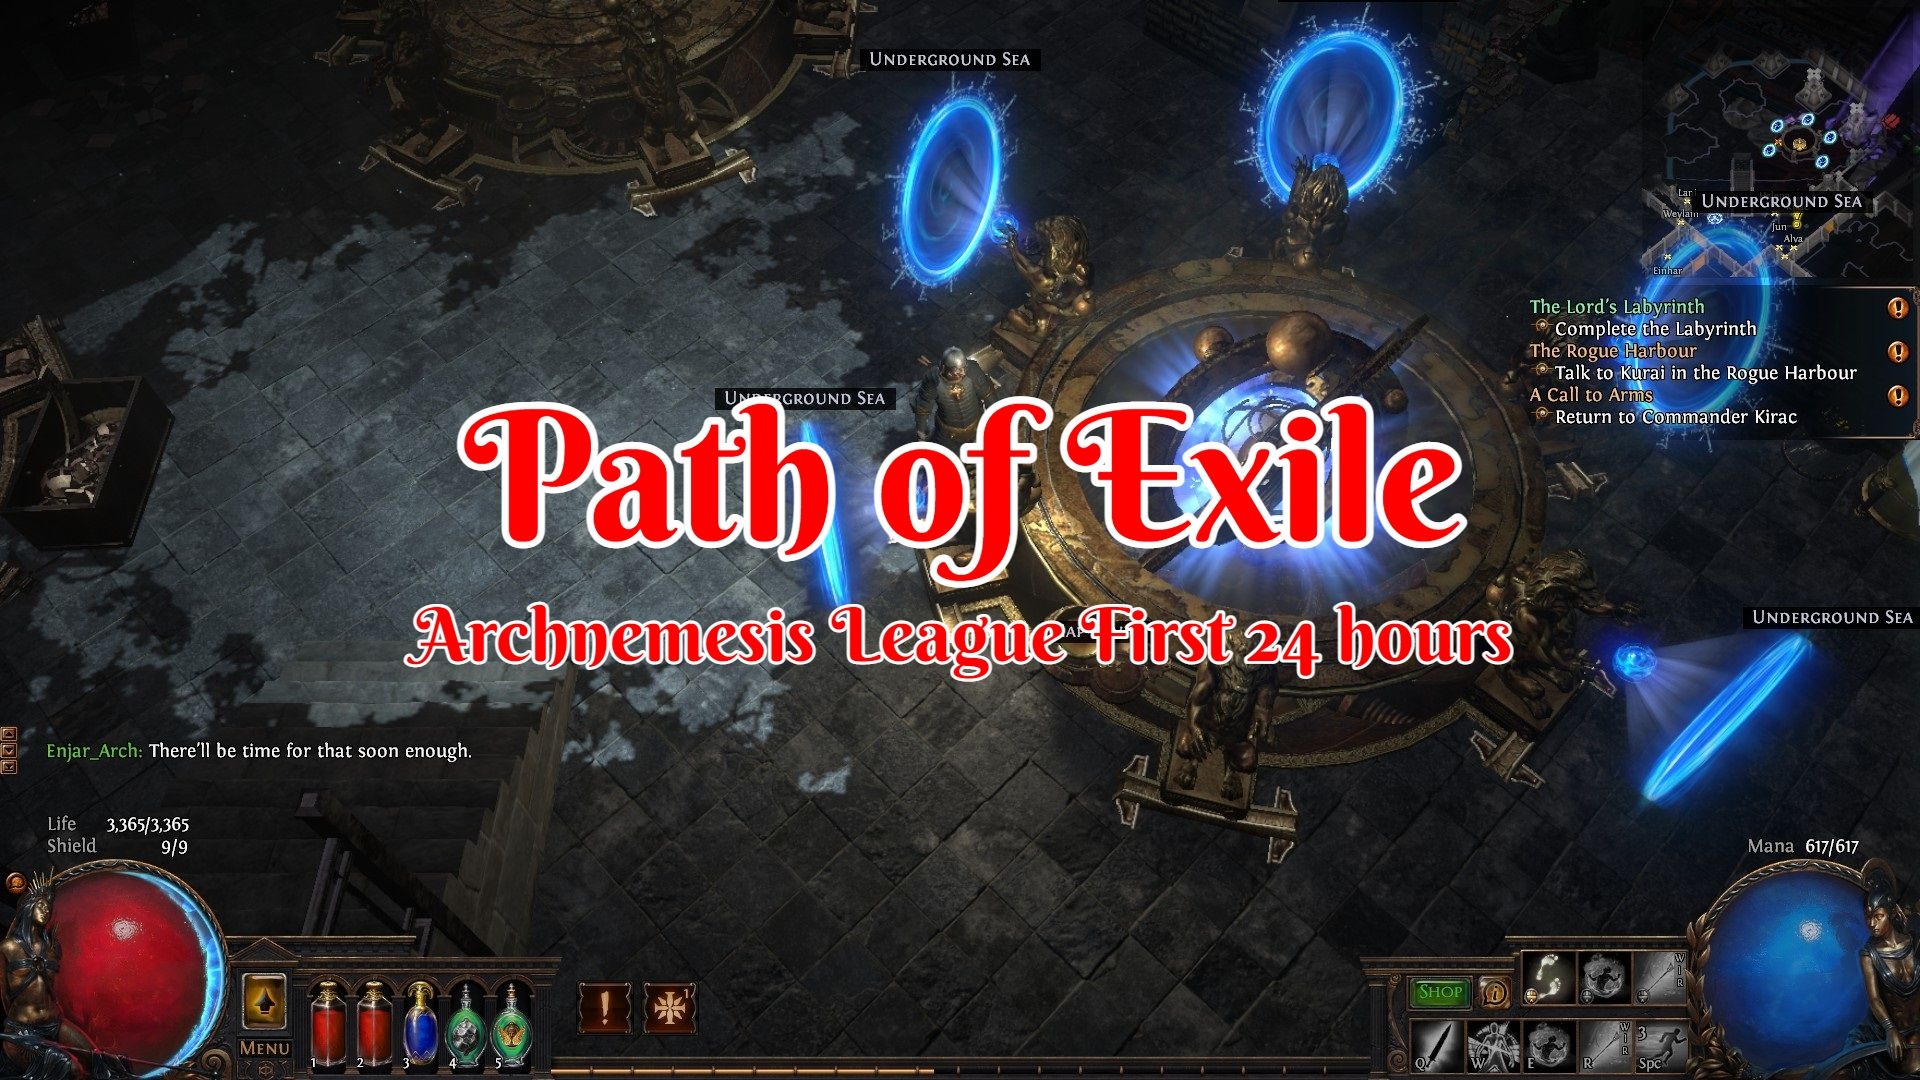 Path of exile arch day 1.jpg